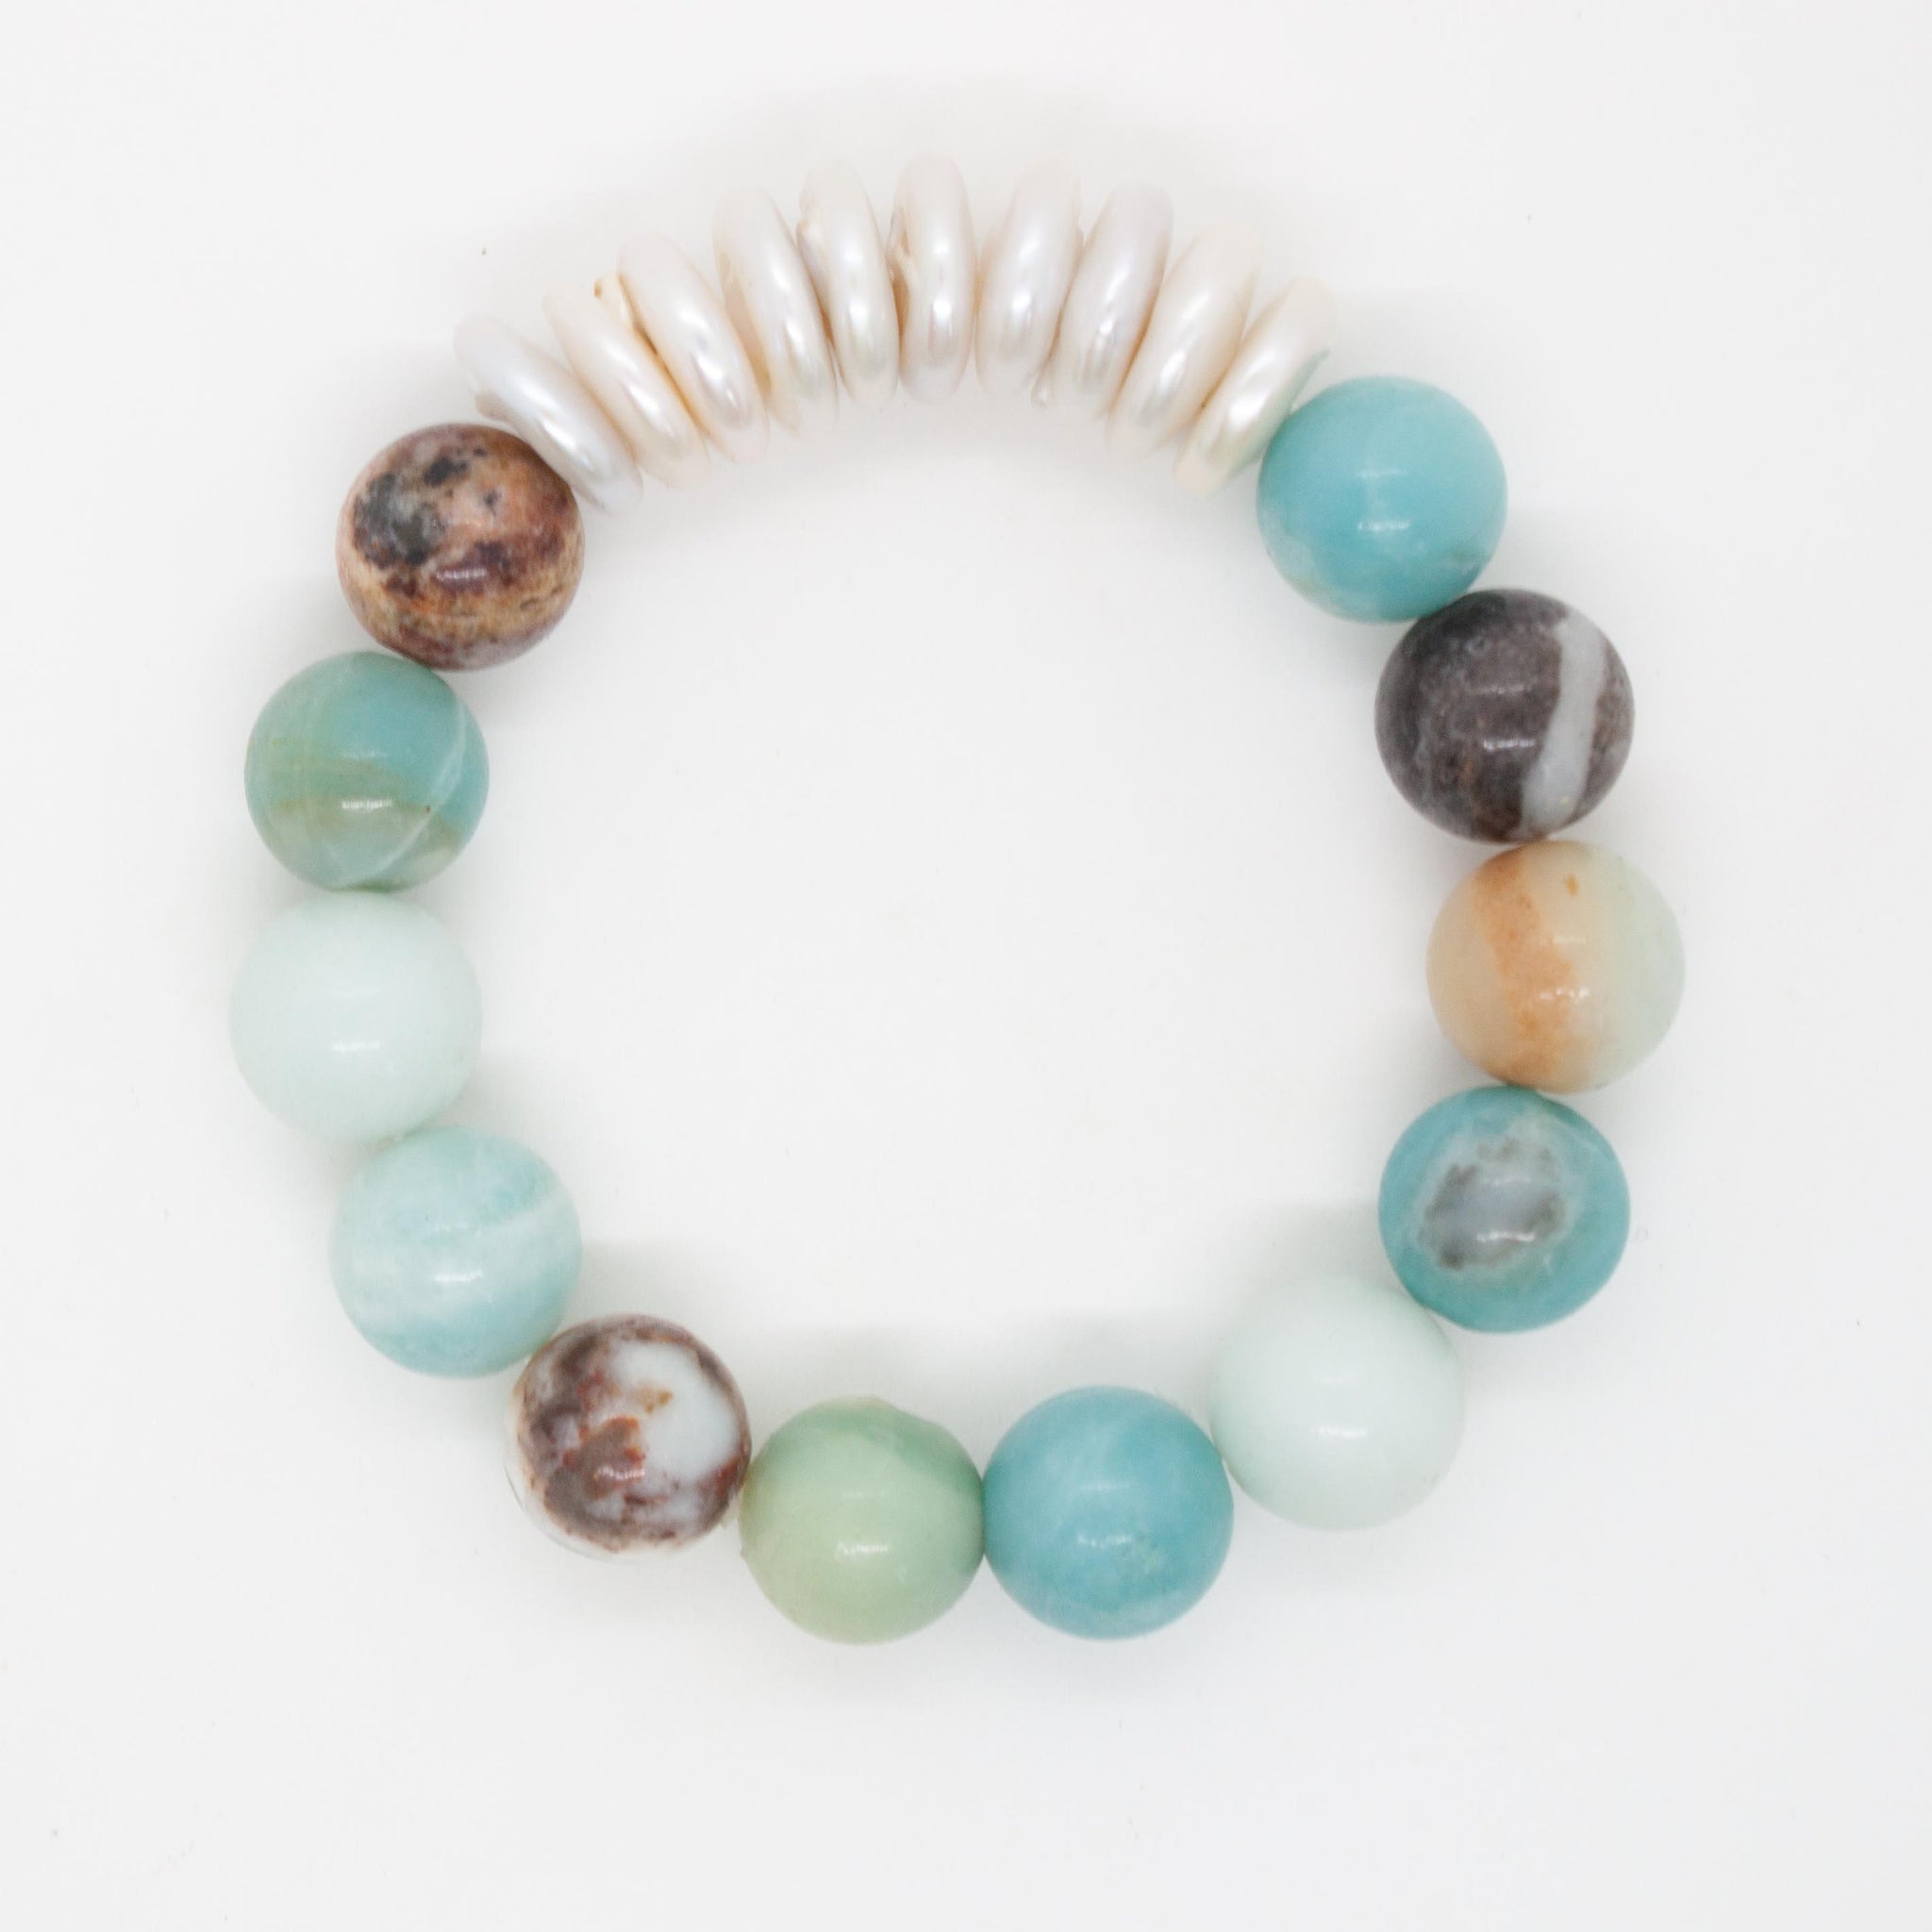 Subdued, earthy tones of black & gold amazonite with lustrous keshi pearls. 7 inch beaded amazonite stretchy bracelet with keshi pearls, double strung with silk elastic cord handmade in Toronto kp jewelry co.